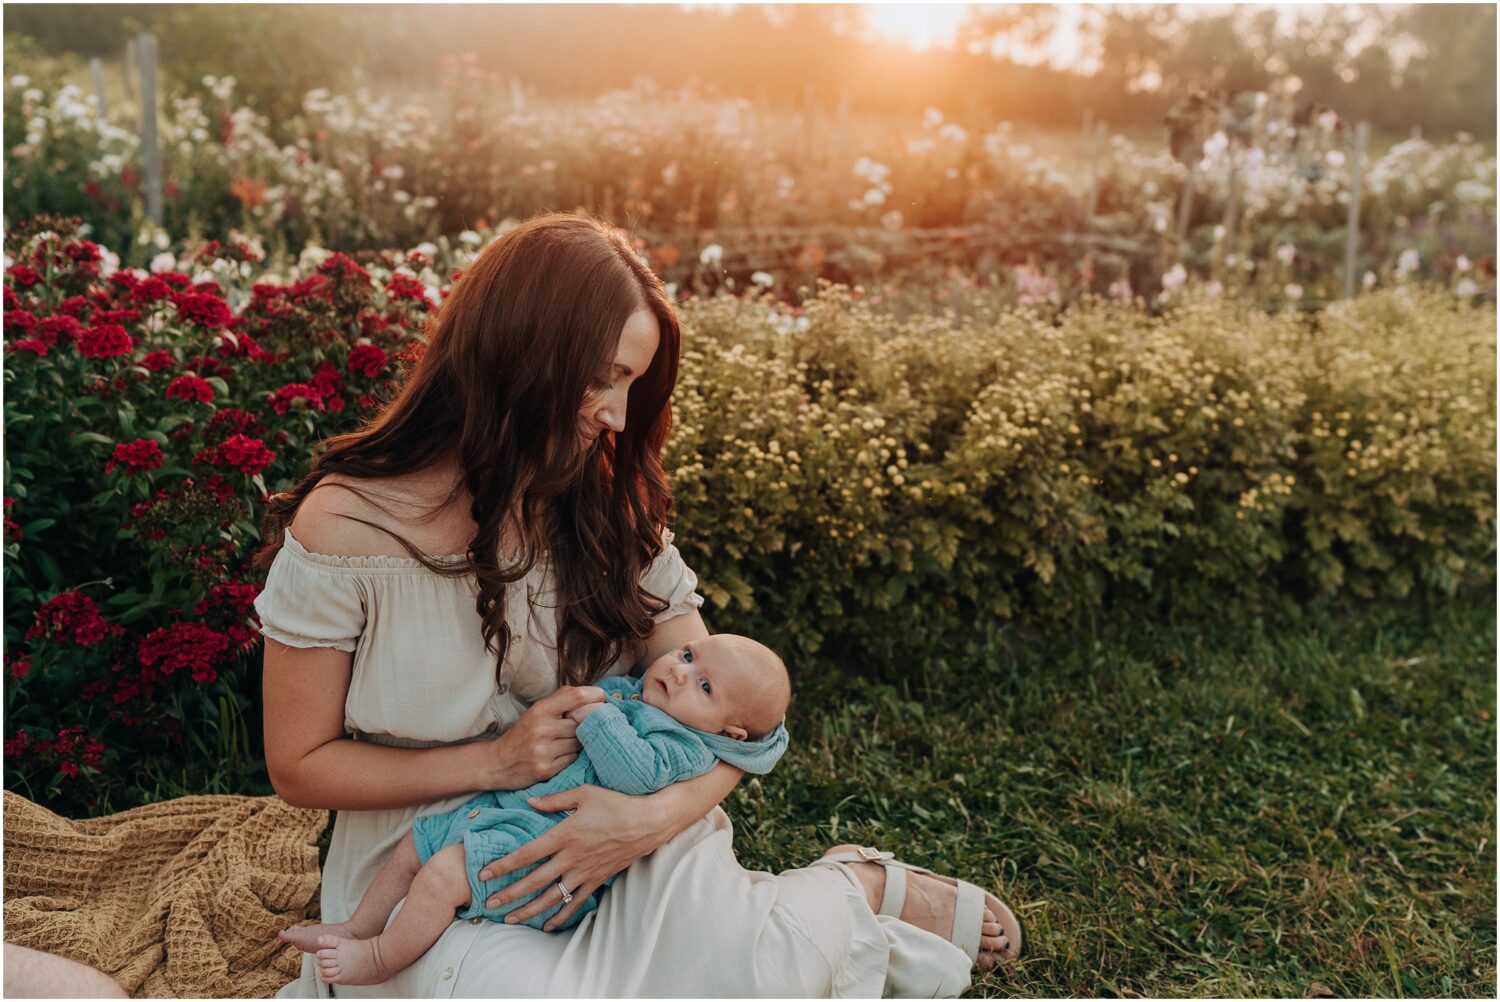 Edmonton family photographer session in a flower farm with a newborn